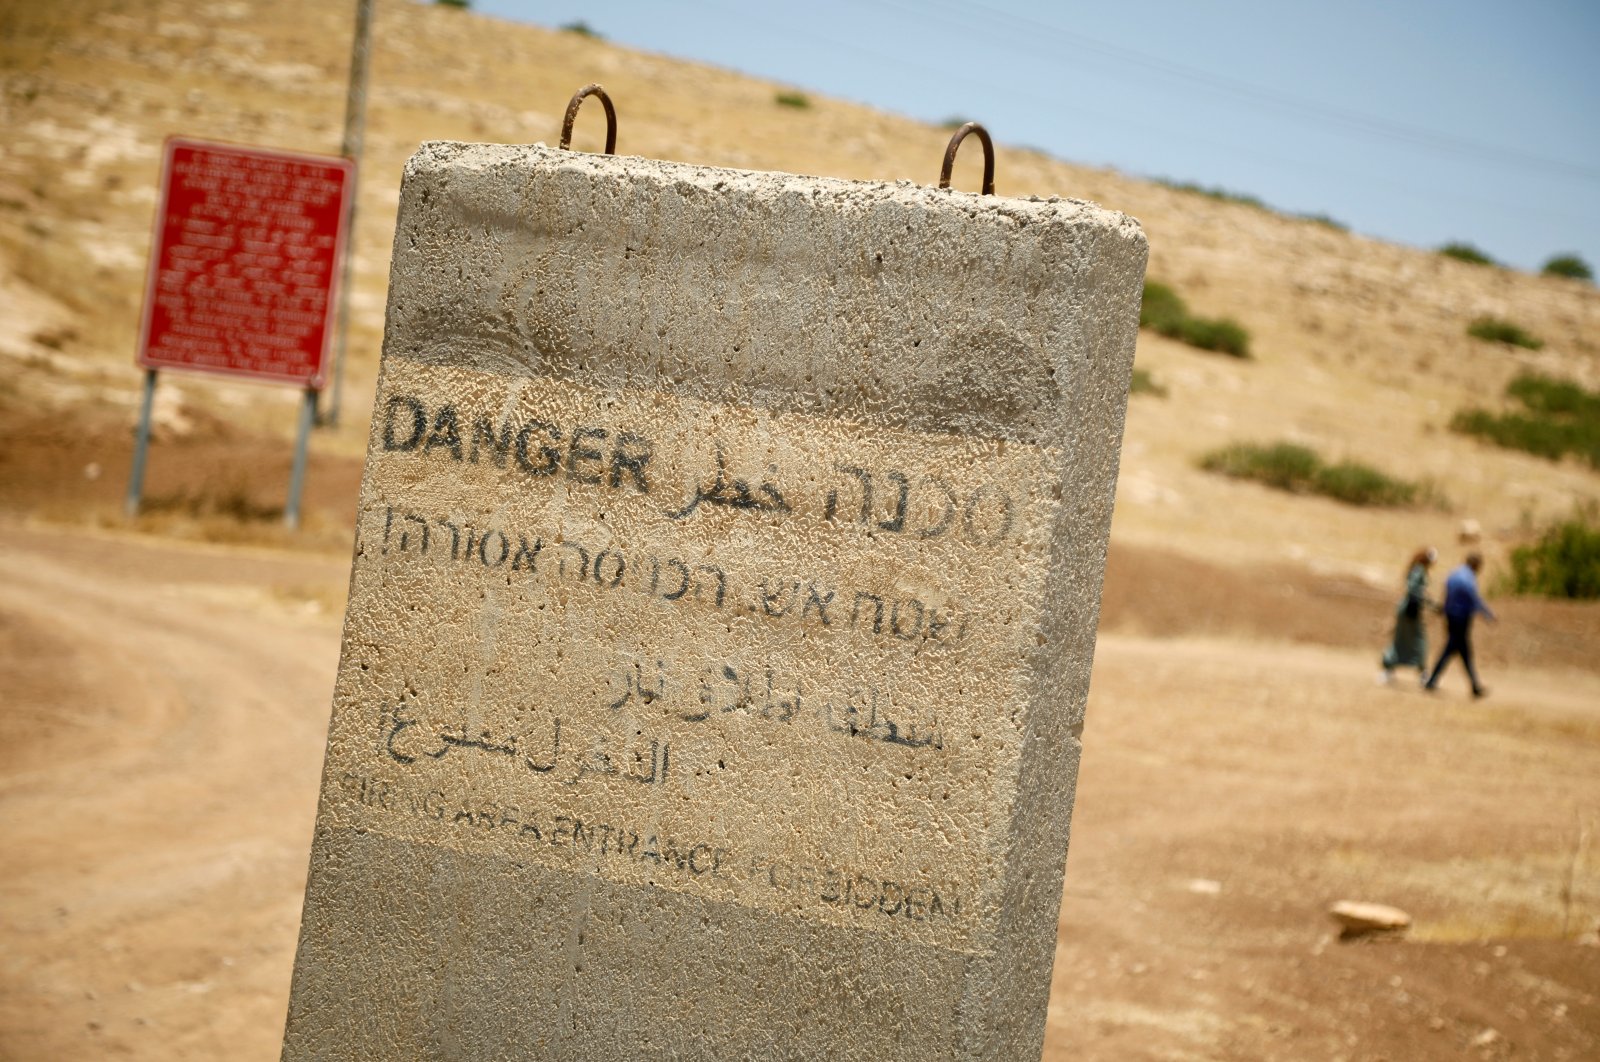 A concrete barrier with writings warning against entering into a firing area is seen in the Jordan Valley in the Israeli-occupied West Bank, Palestine, June 13, 2020. (Reuters Photo)